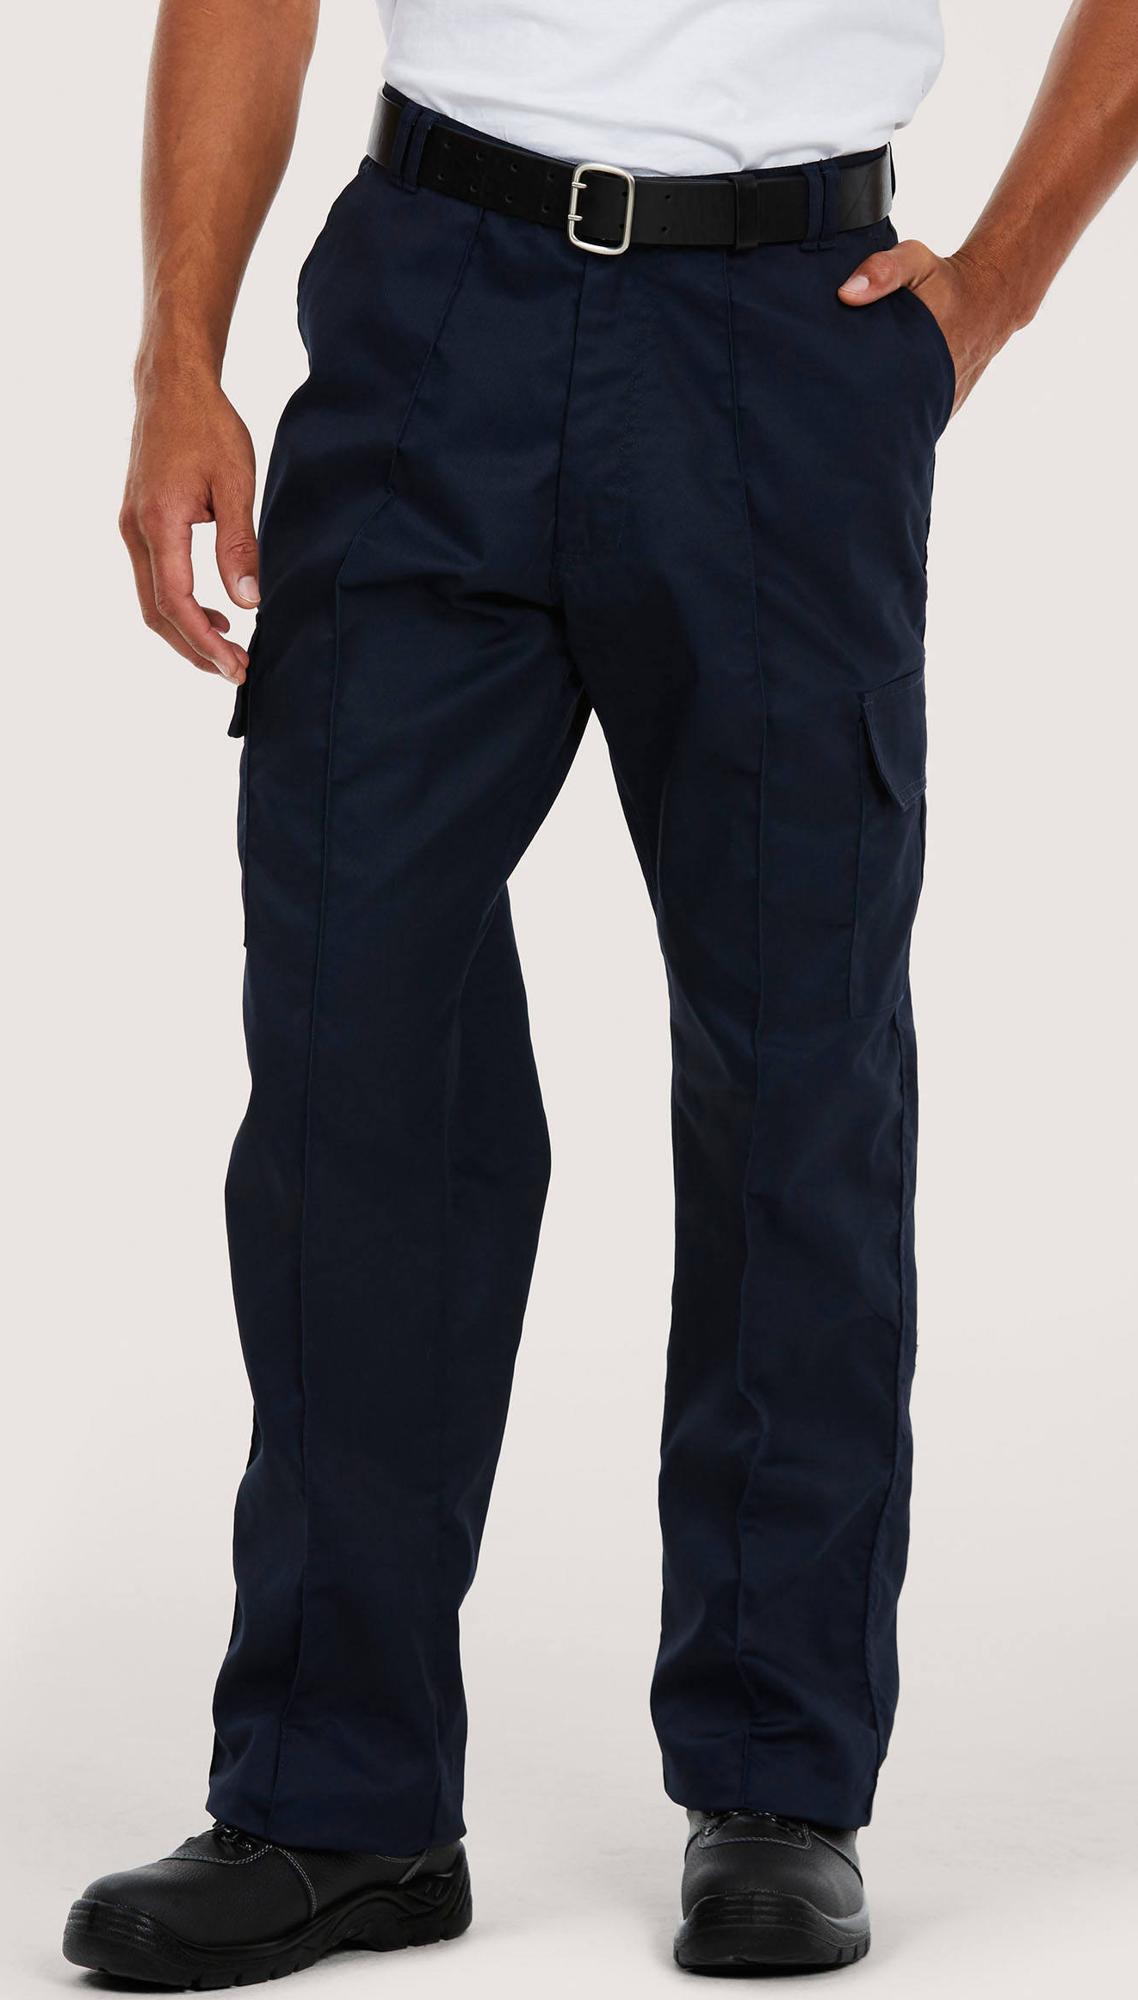 Discover 86+ cargo combat trousers best - in.cdgdbentre